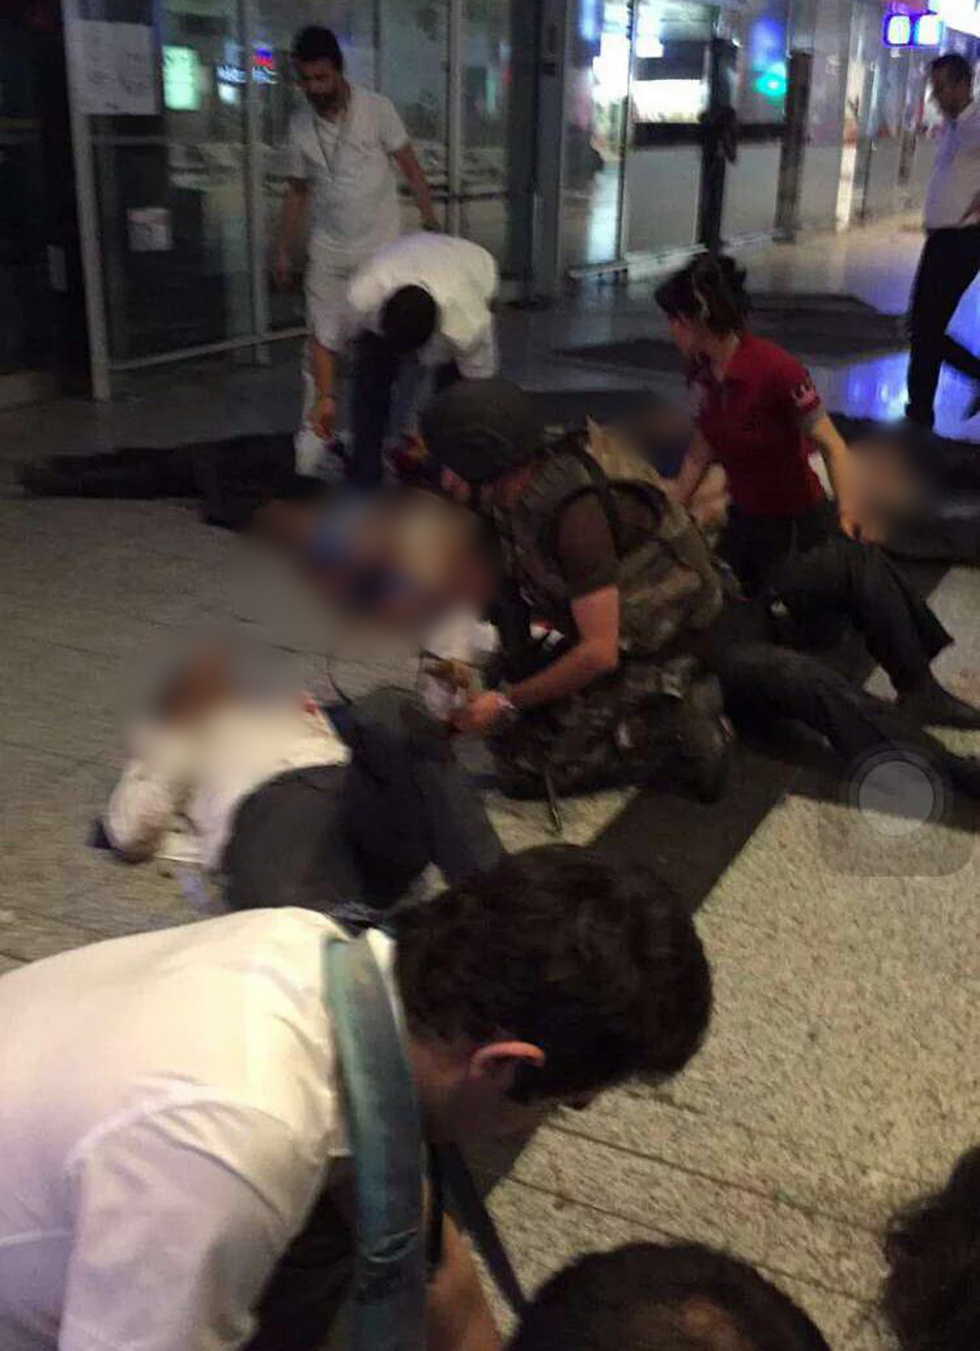 Dead and wounded at Ataturk Airport in Turkey 